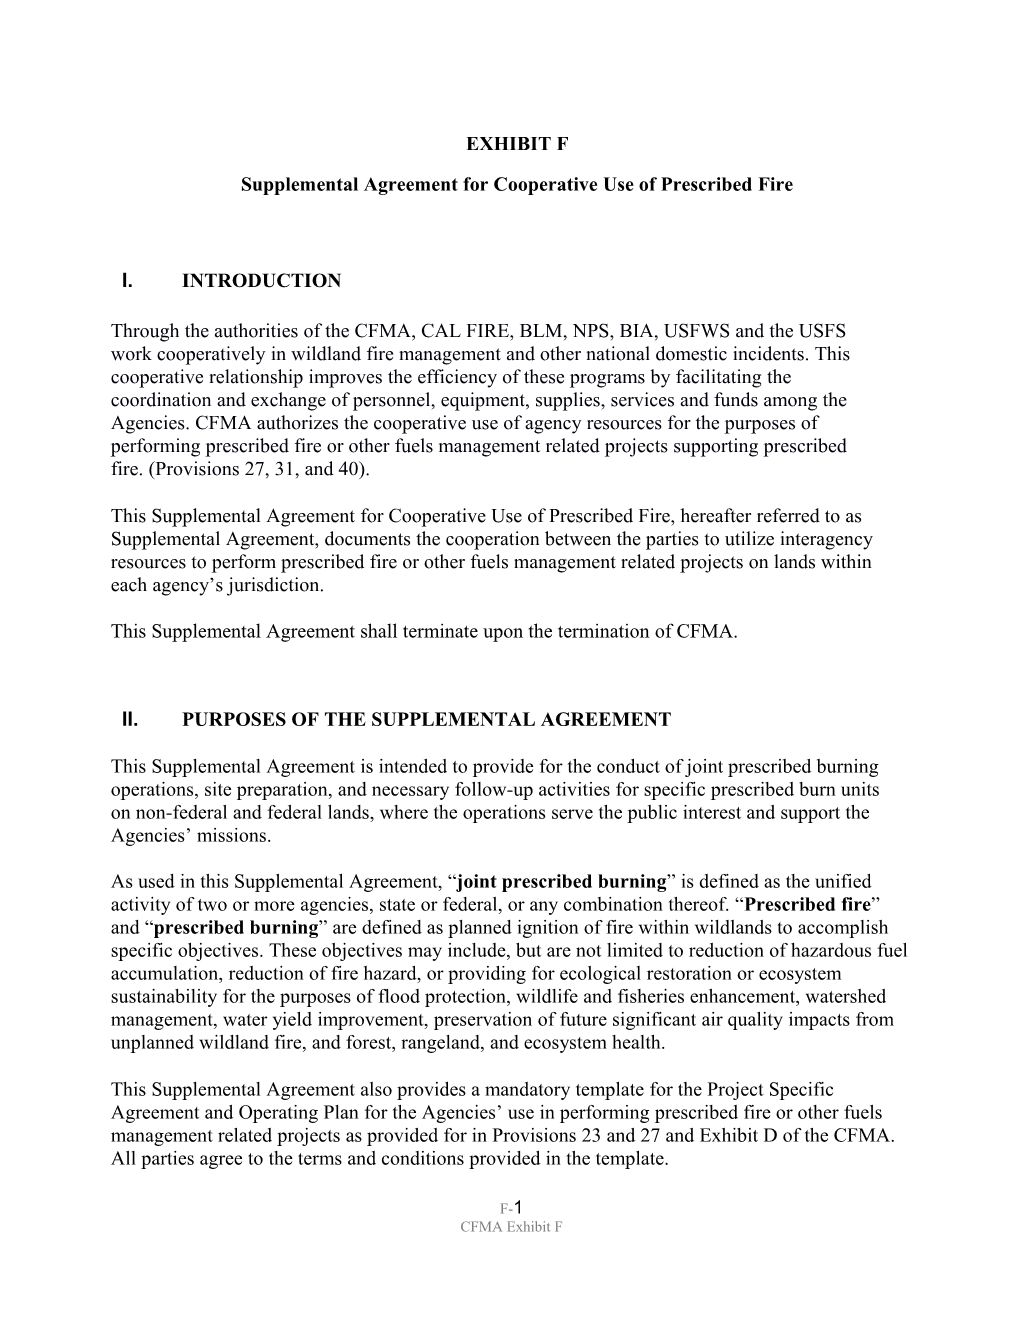 Supplemental Agreement for Cooperative Use of Prescribed Fire